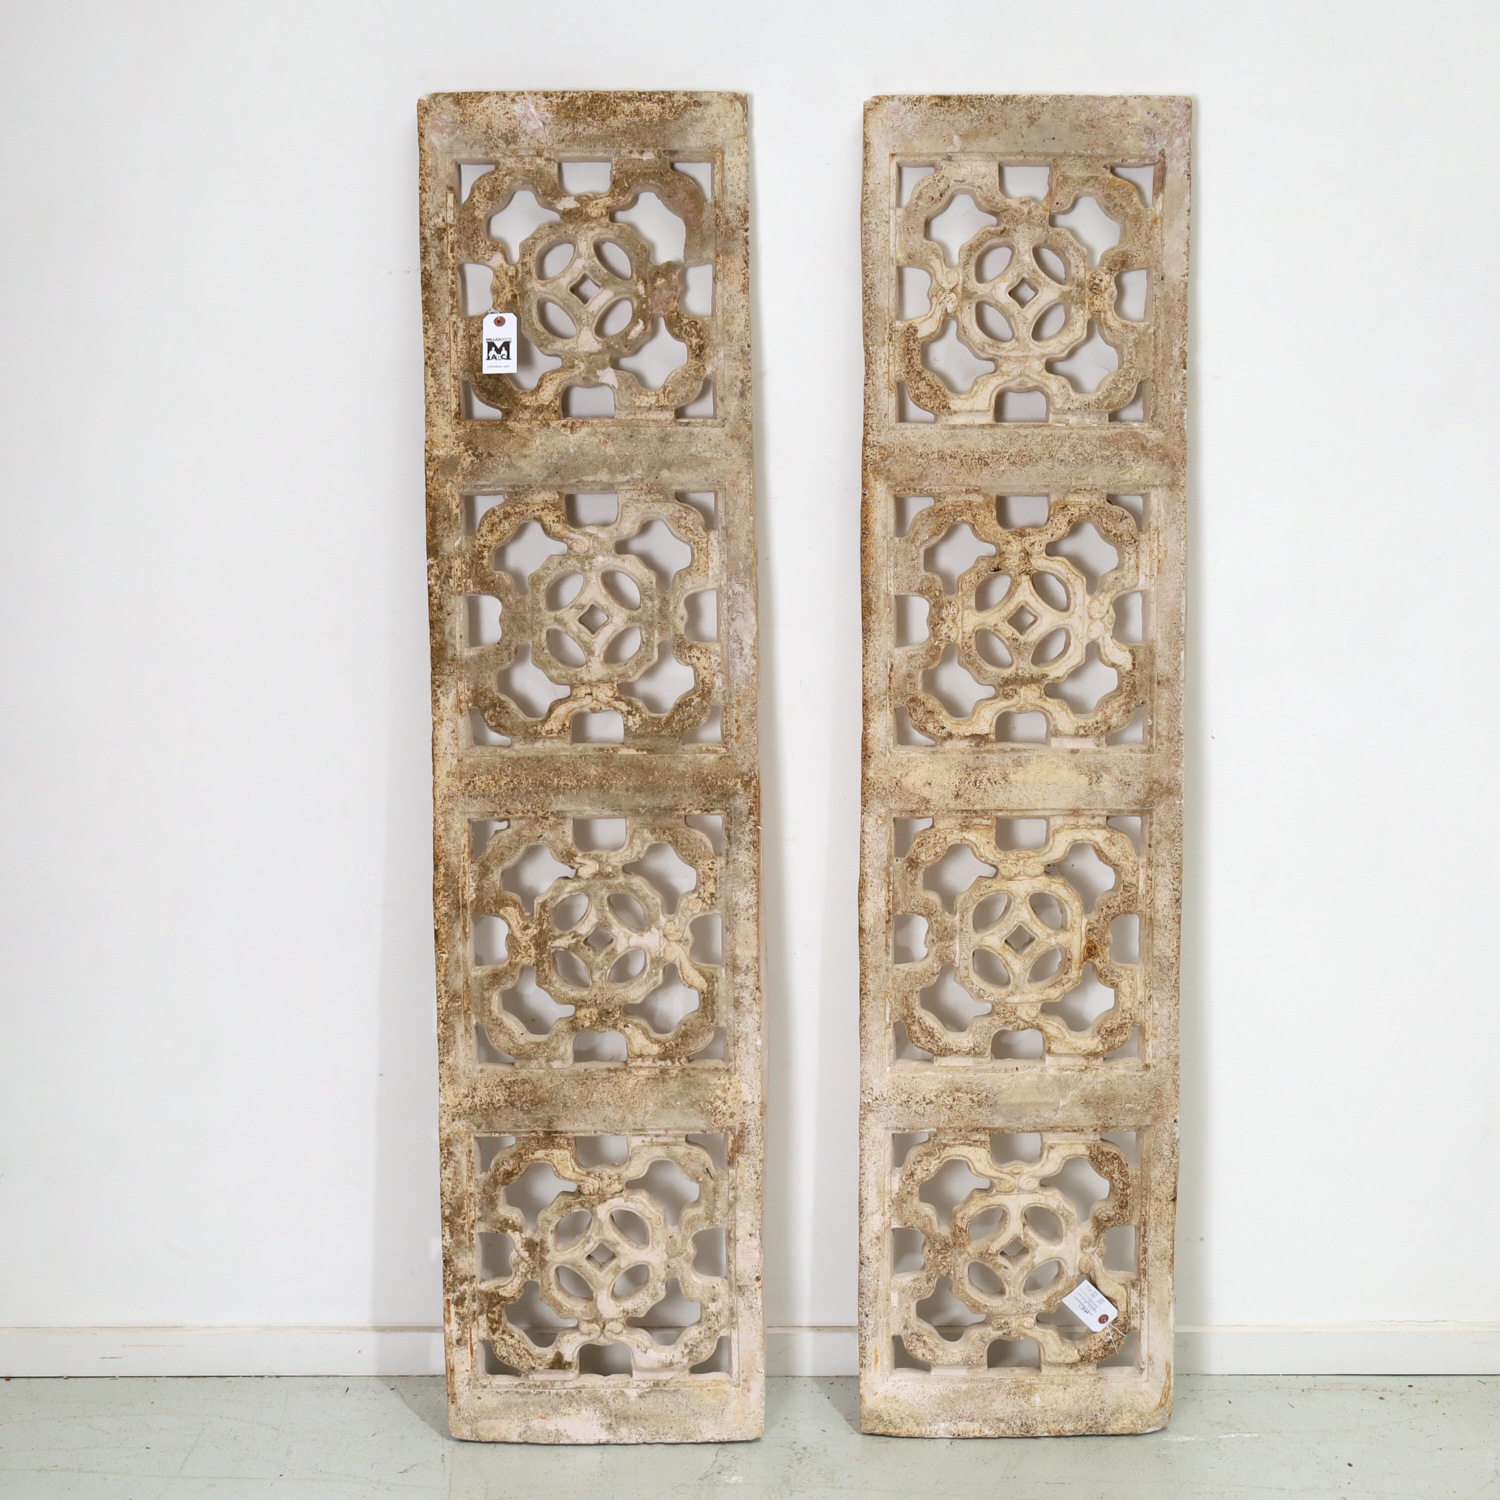 PAIR ASIAN MODERN CAST STONE ARCHITECTURAL 36175f